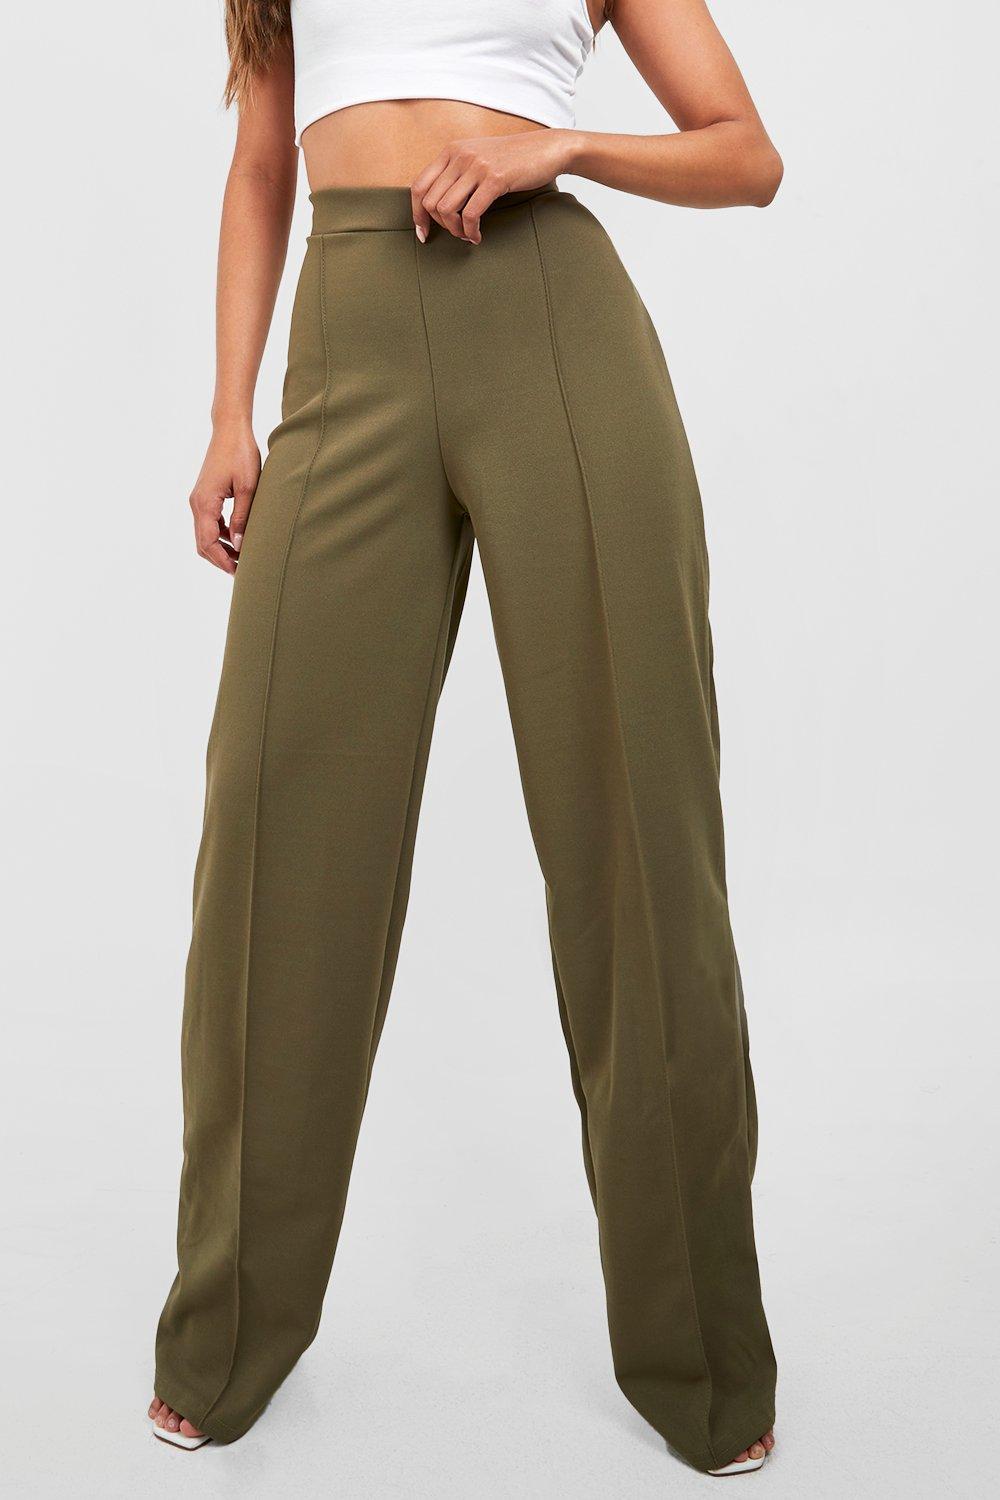 High Waisted Pin Tuck Wide Full Length Pants